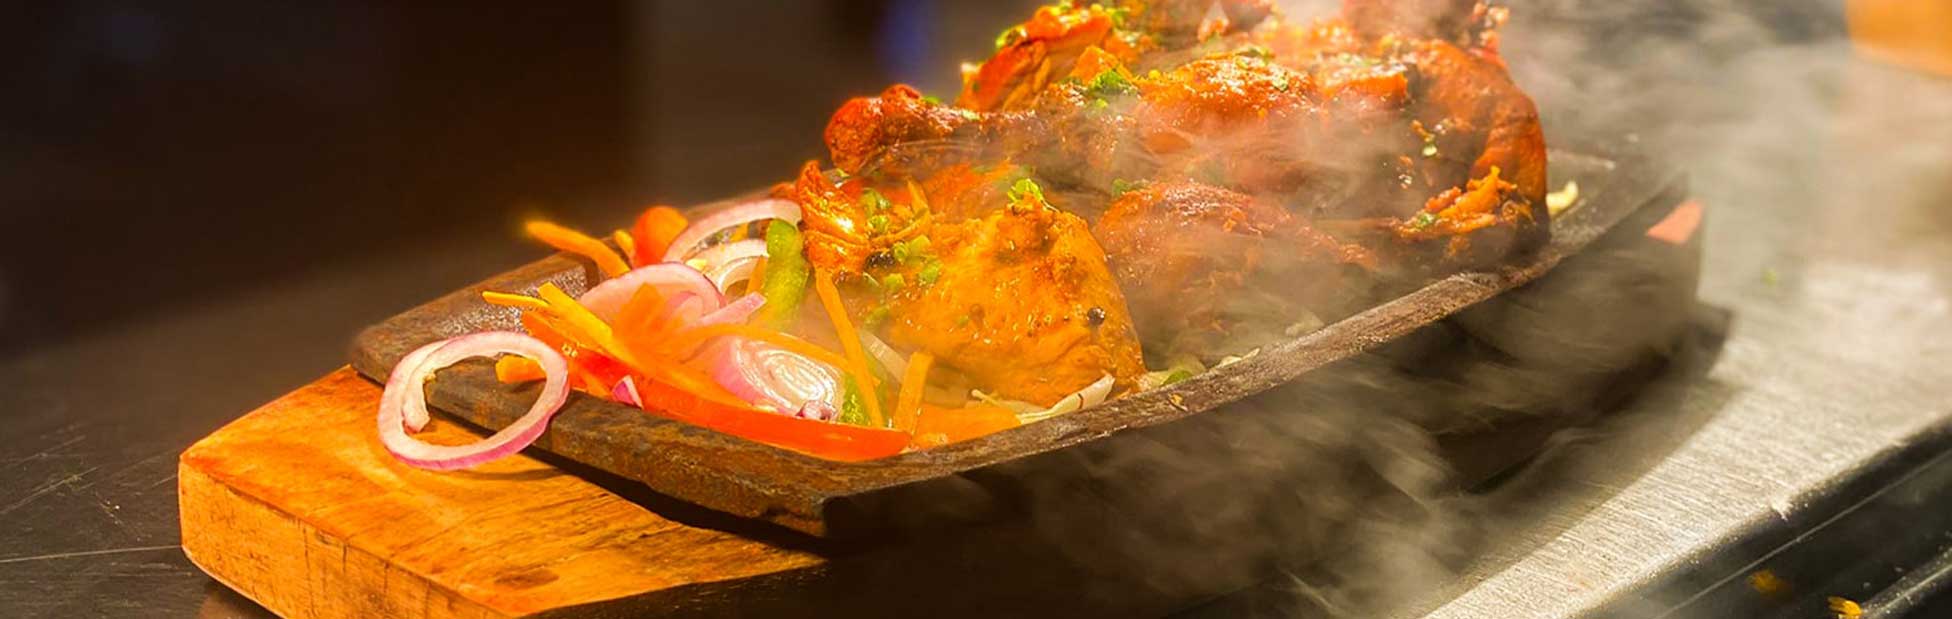 sizzling Indian Dish